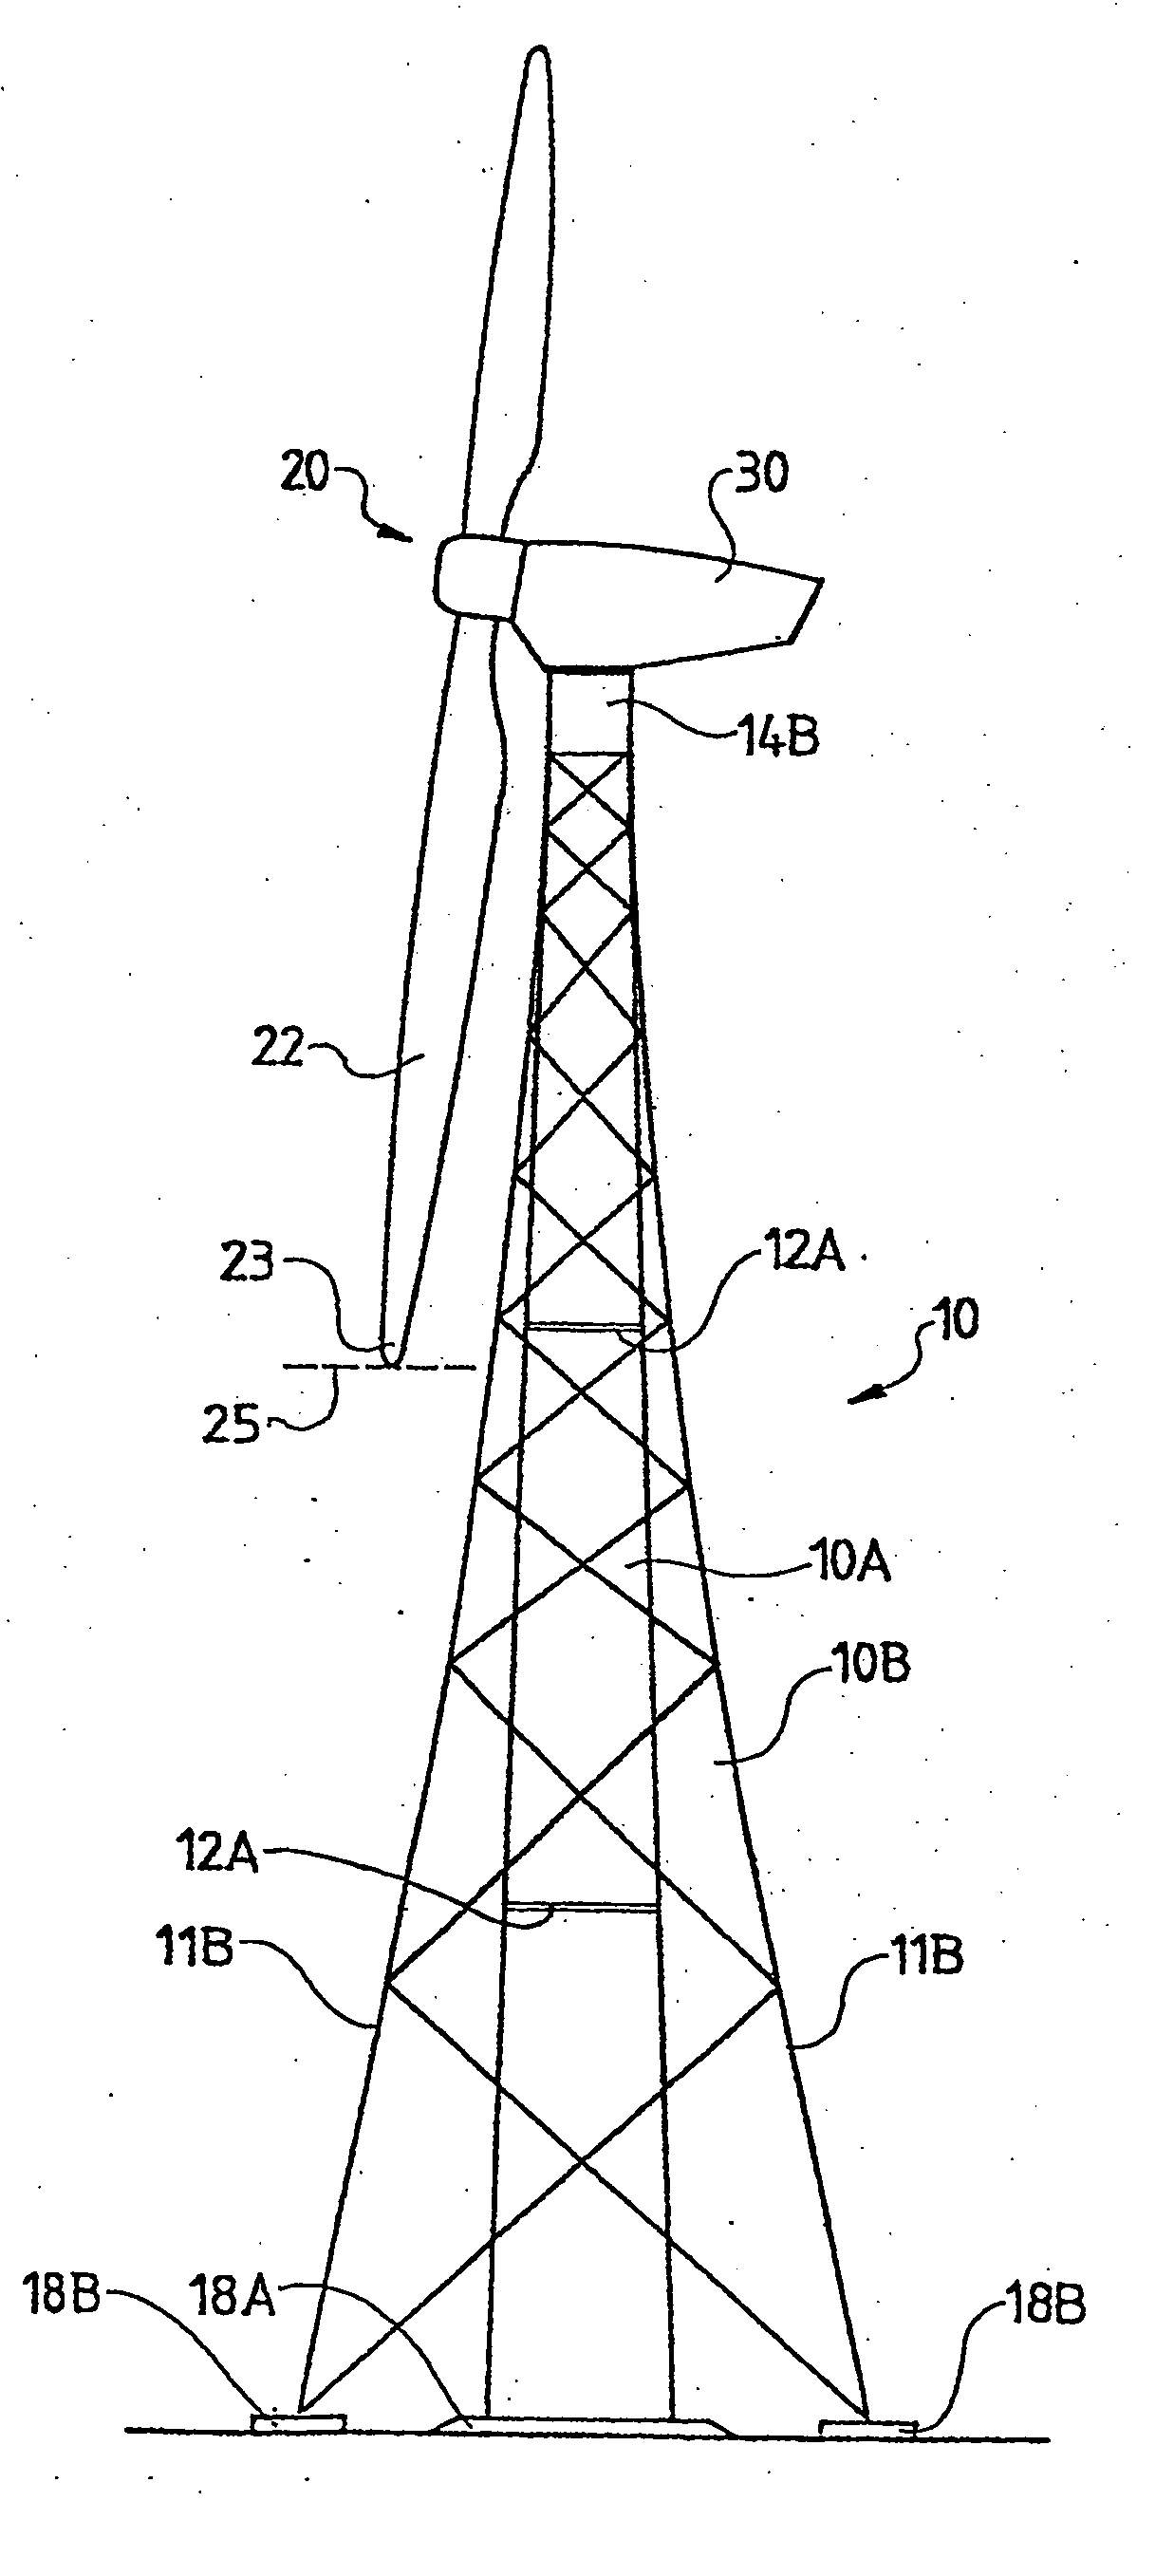 Tower for a wind power station